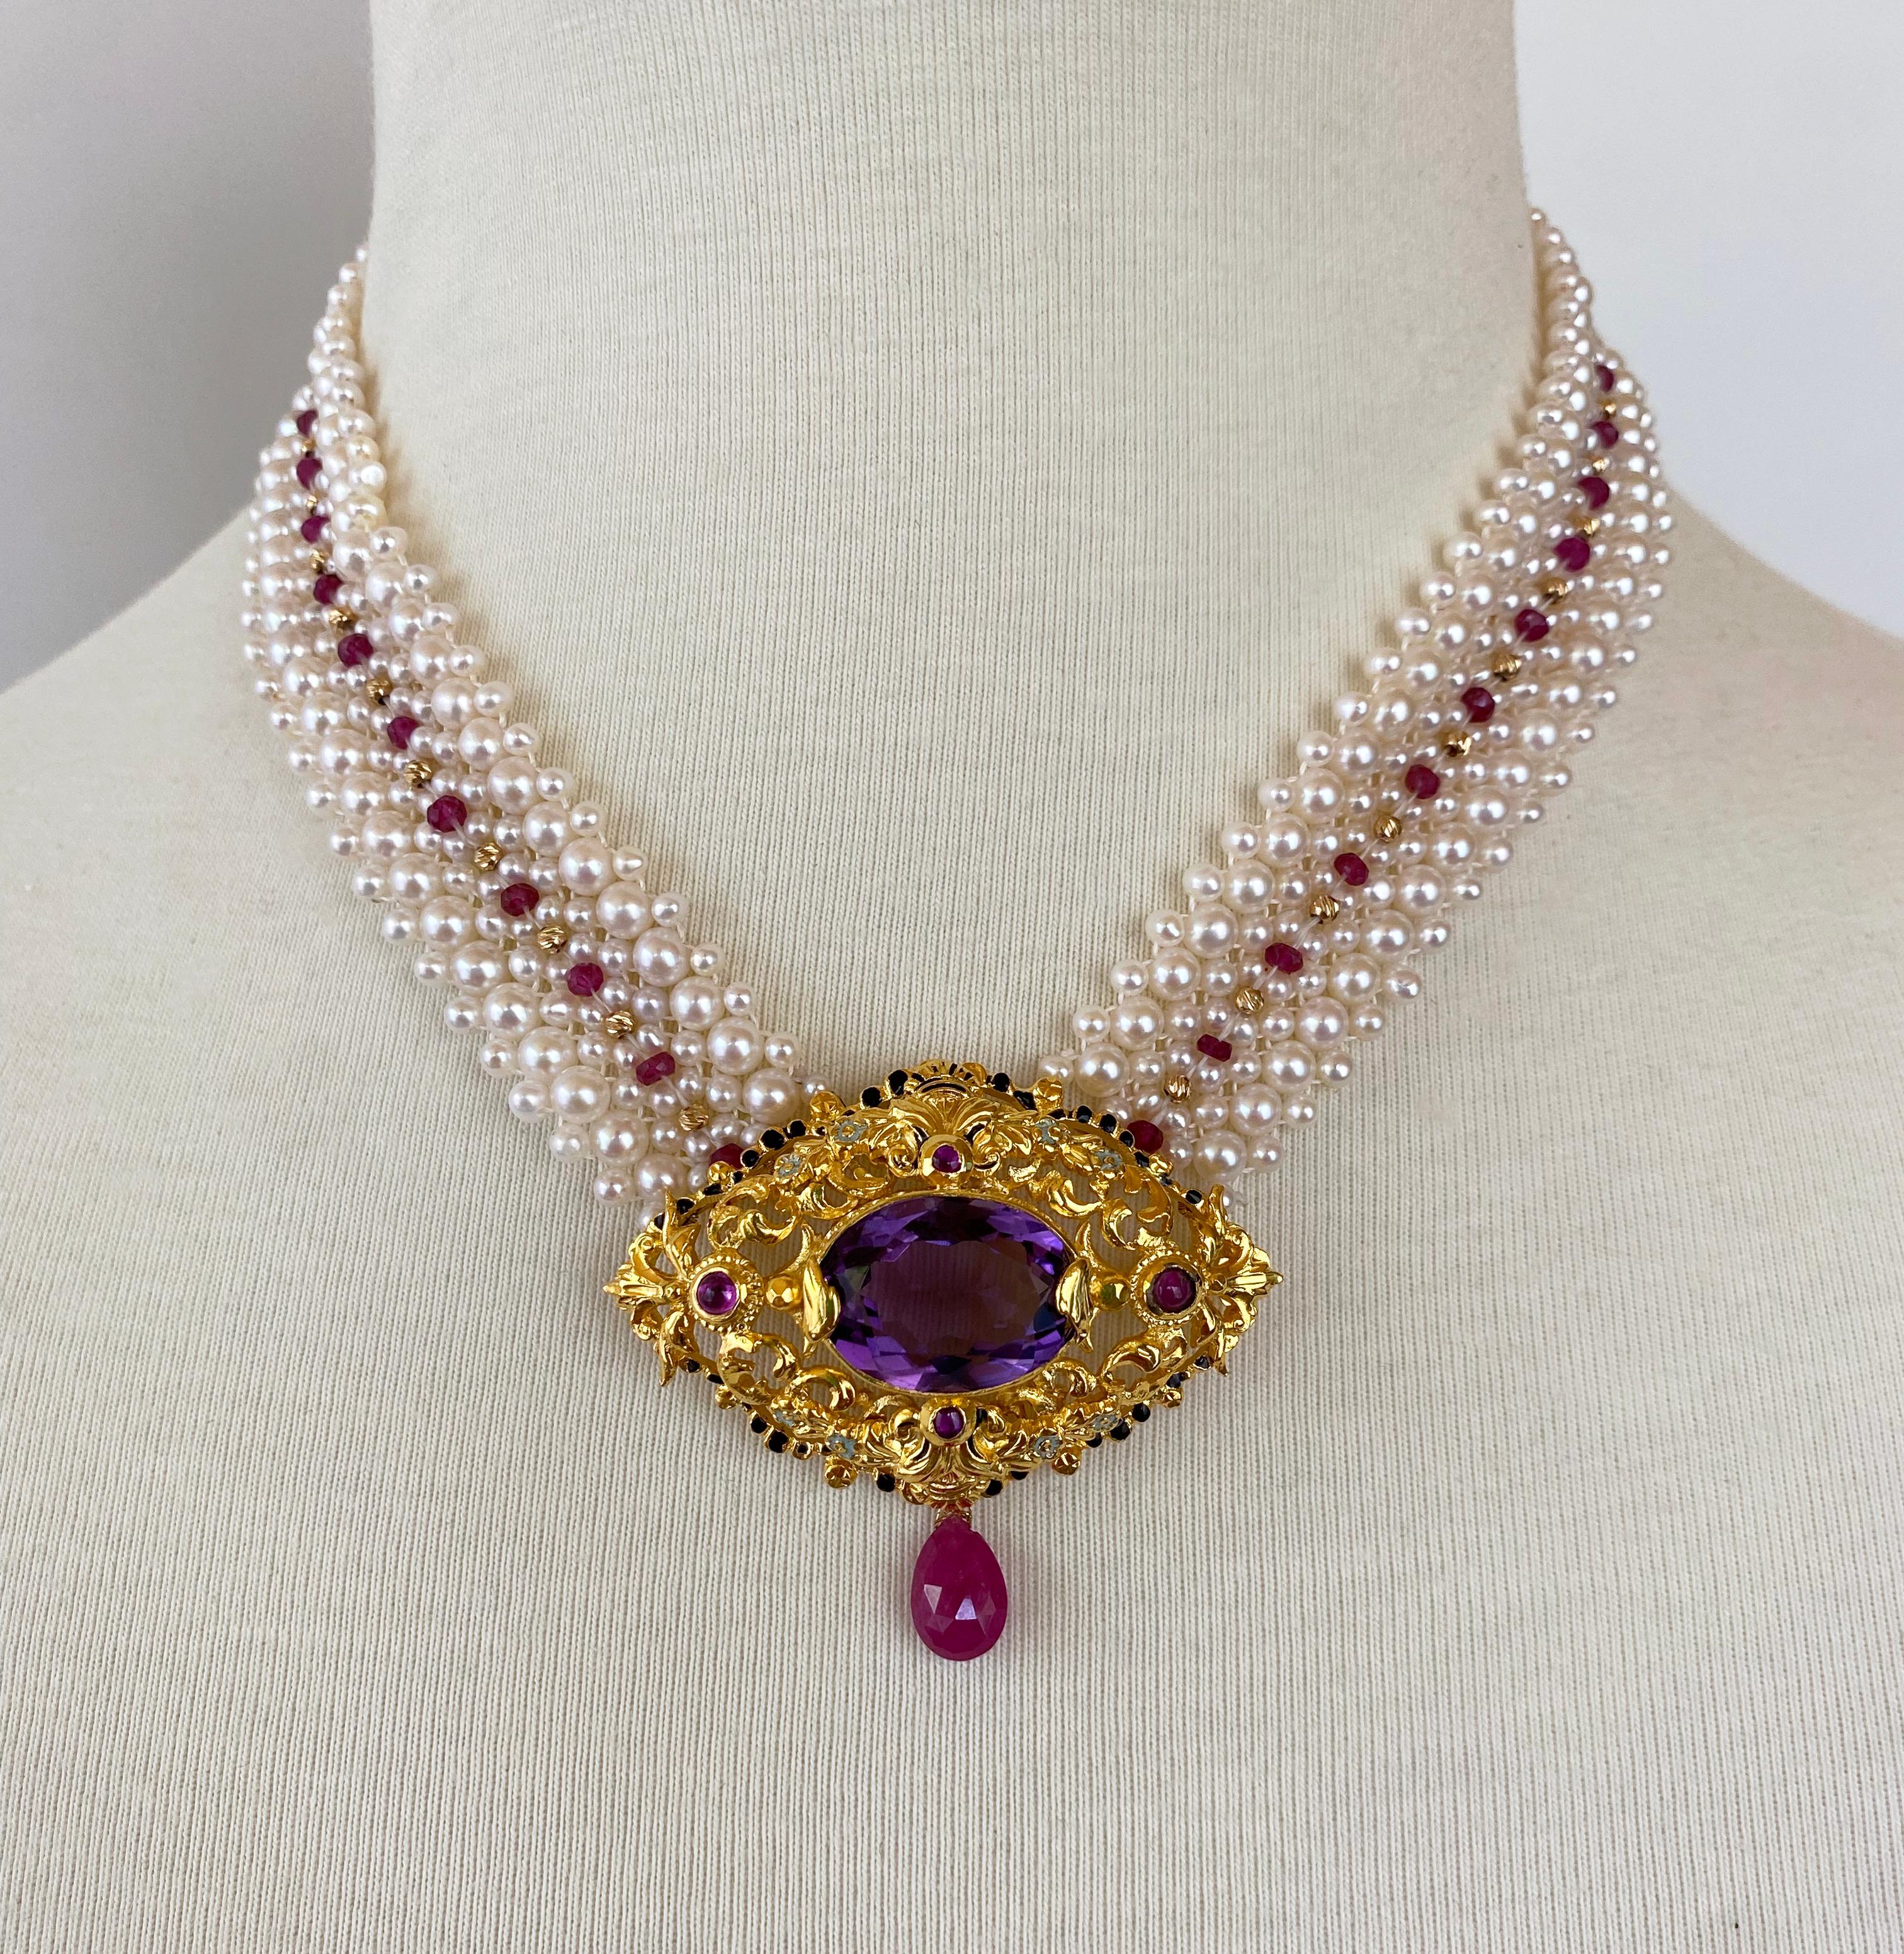 Marina J. Woven Pearl, Ruby & Gold Necklace with Vintage Gold & Amethyst Brooch 5